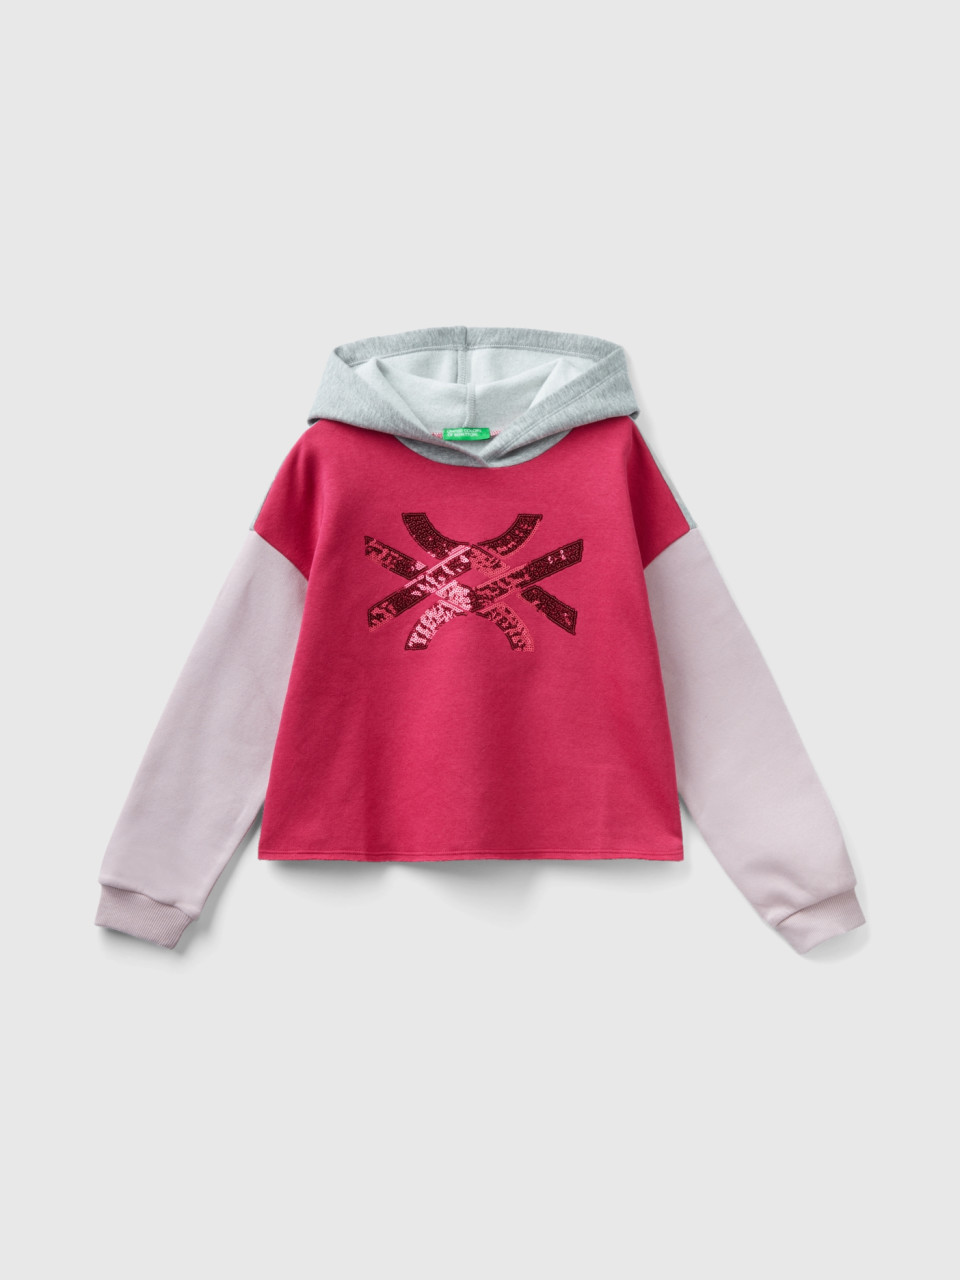 Benetton, Hoodie With Sequins, Multi-color, Kids